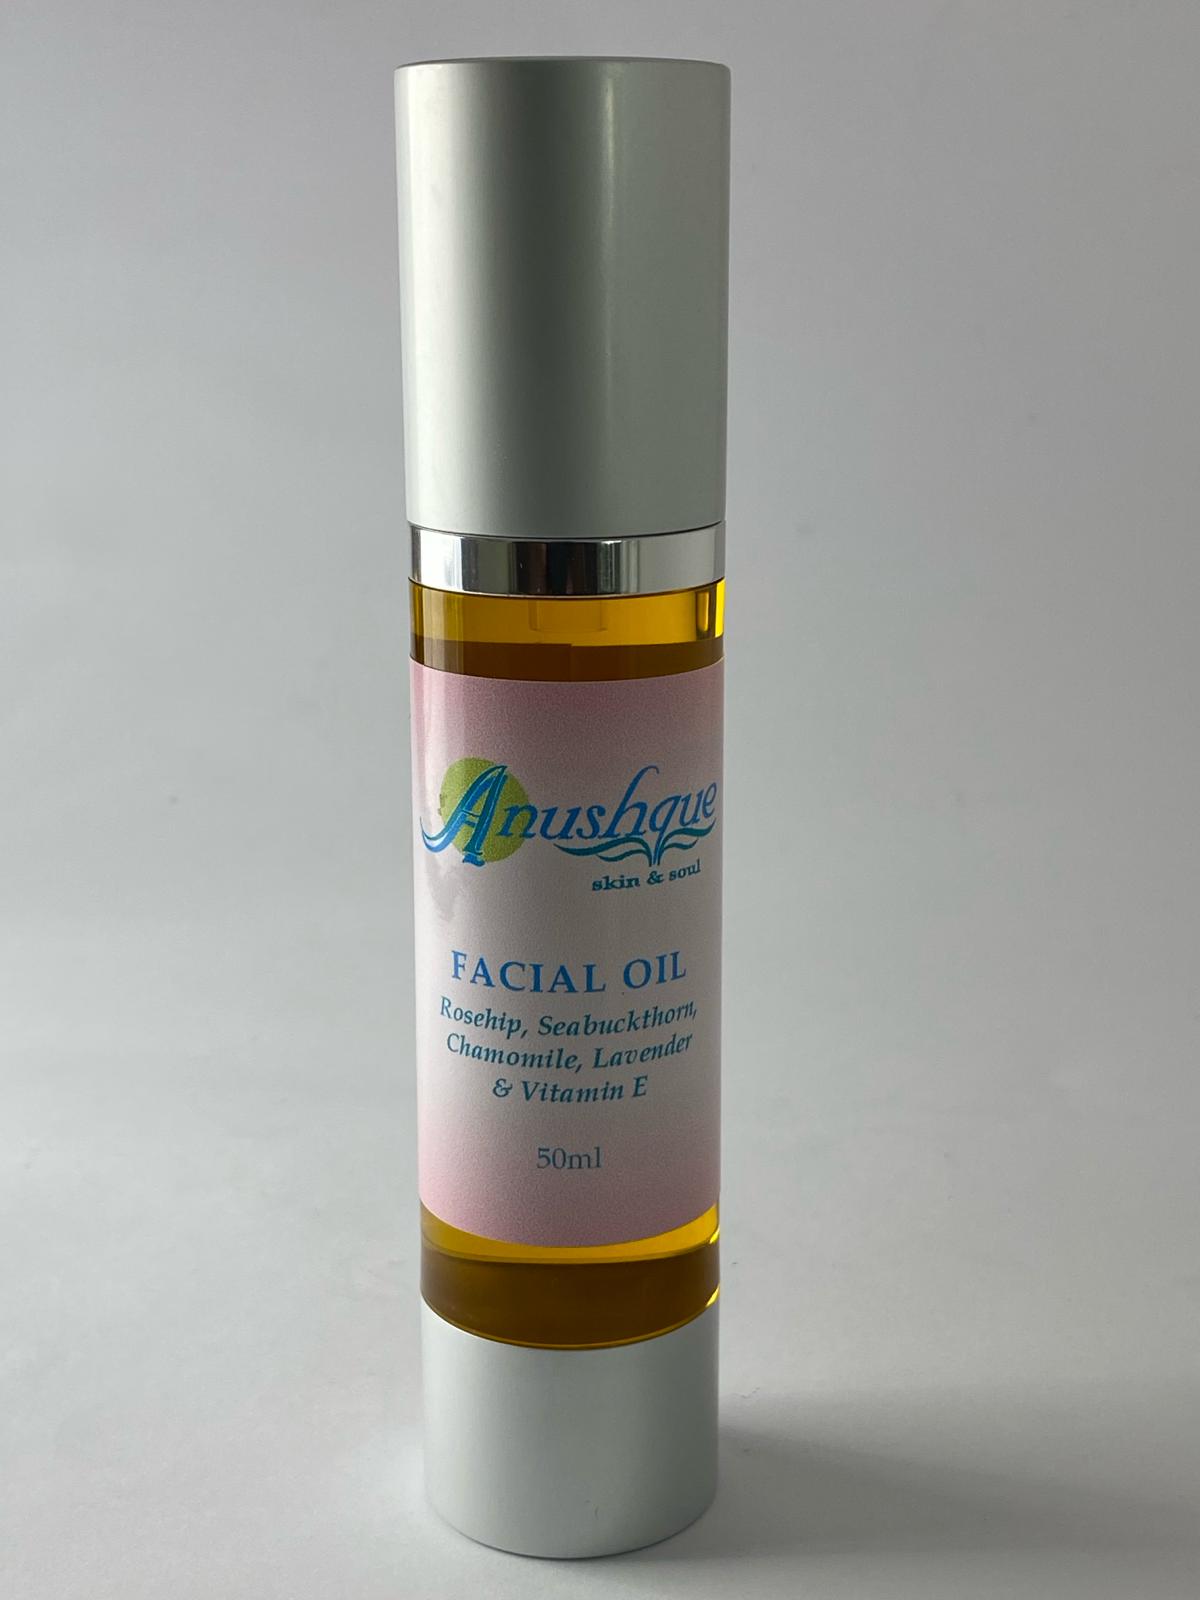 50ml pump bottle of face oil enriched with rosehip, seabuckthorn, chamomile, lavender, and vitamin E for rejuvenating skincare.